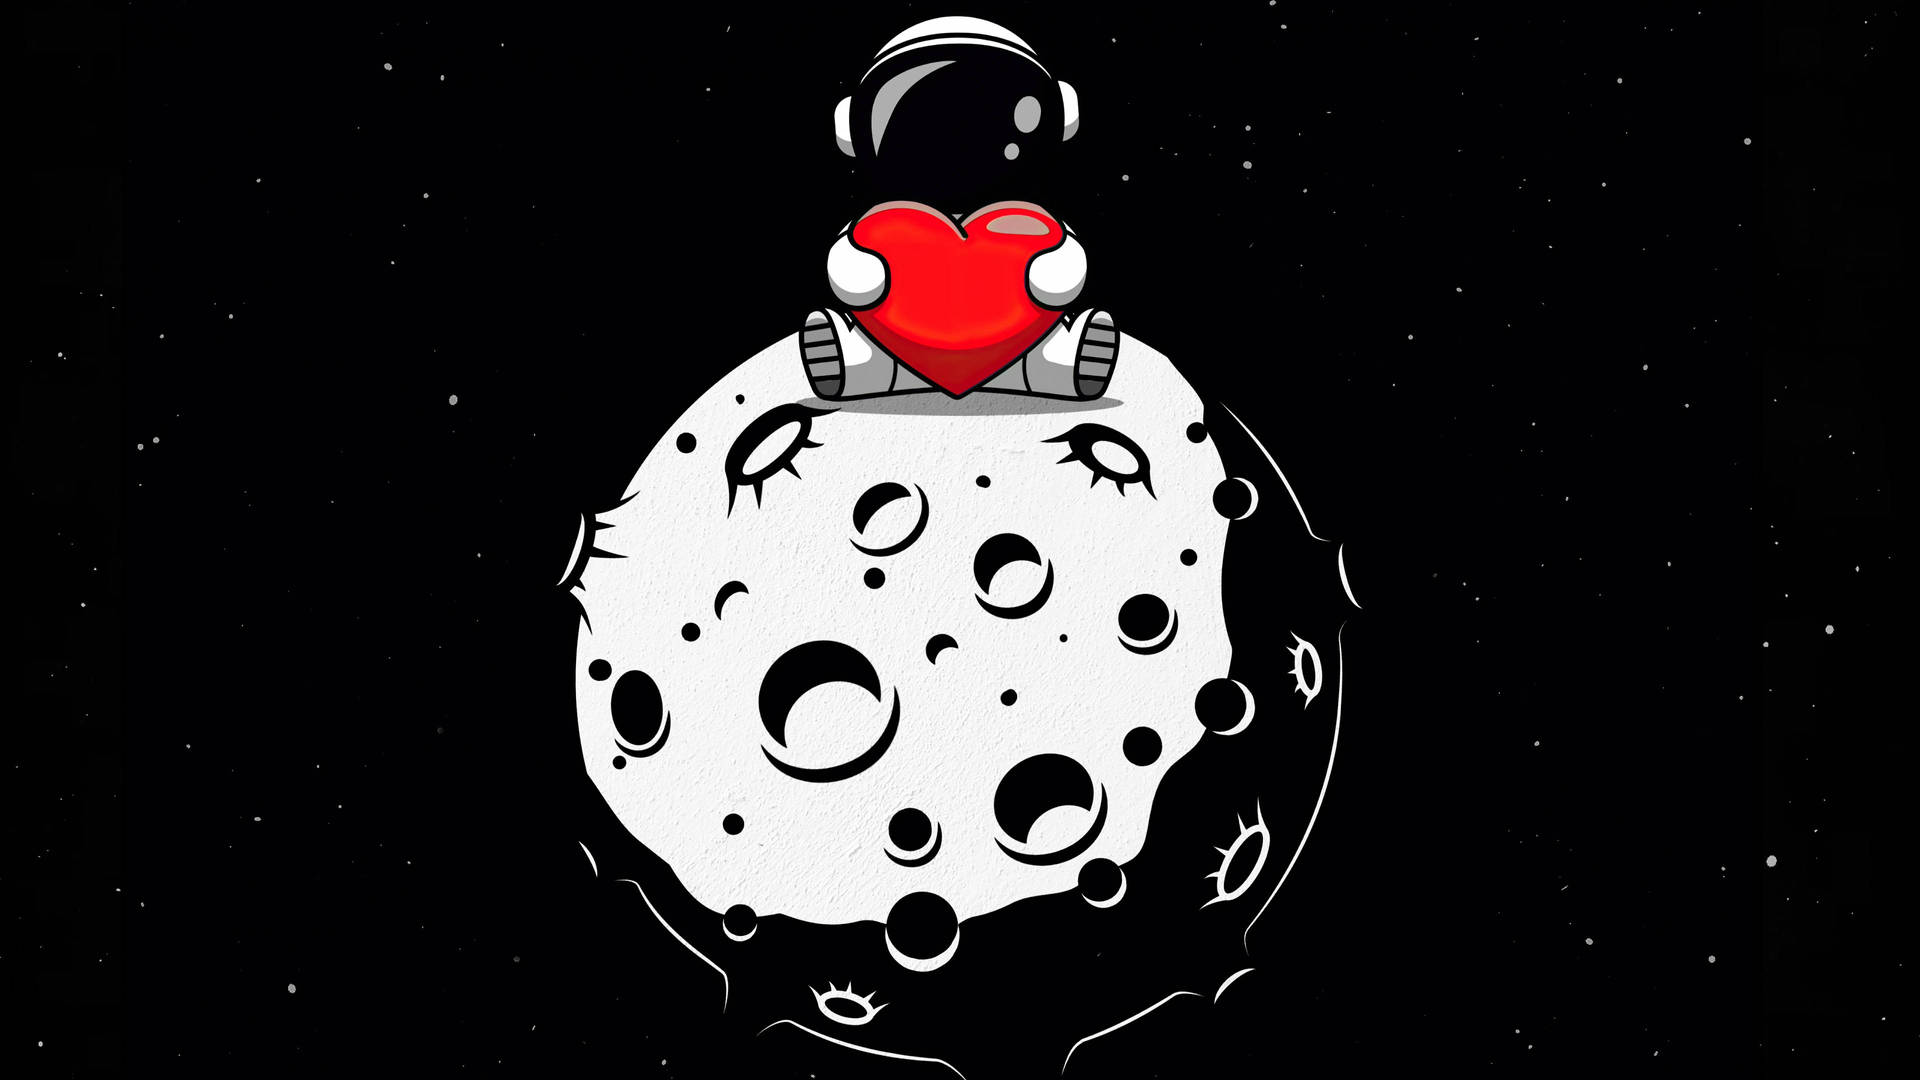 Black And White Astronaut Love Moon Wallpaper